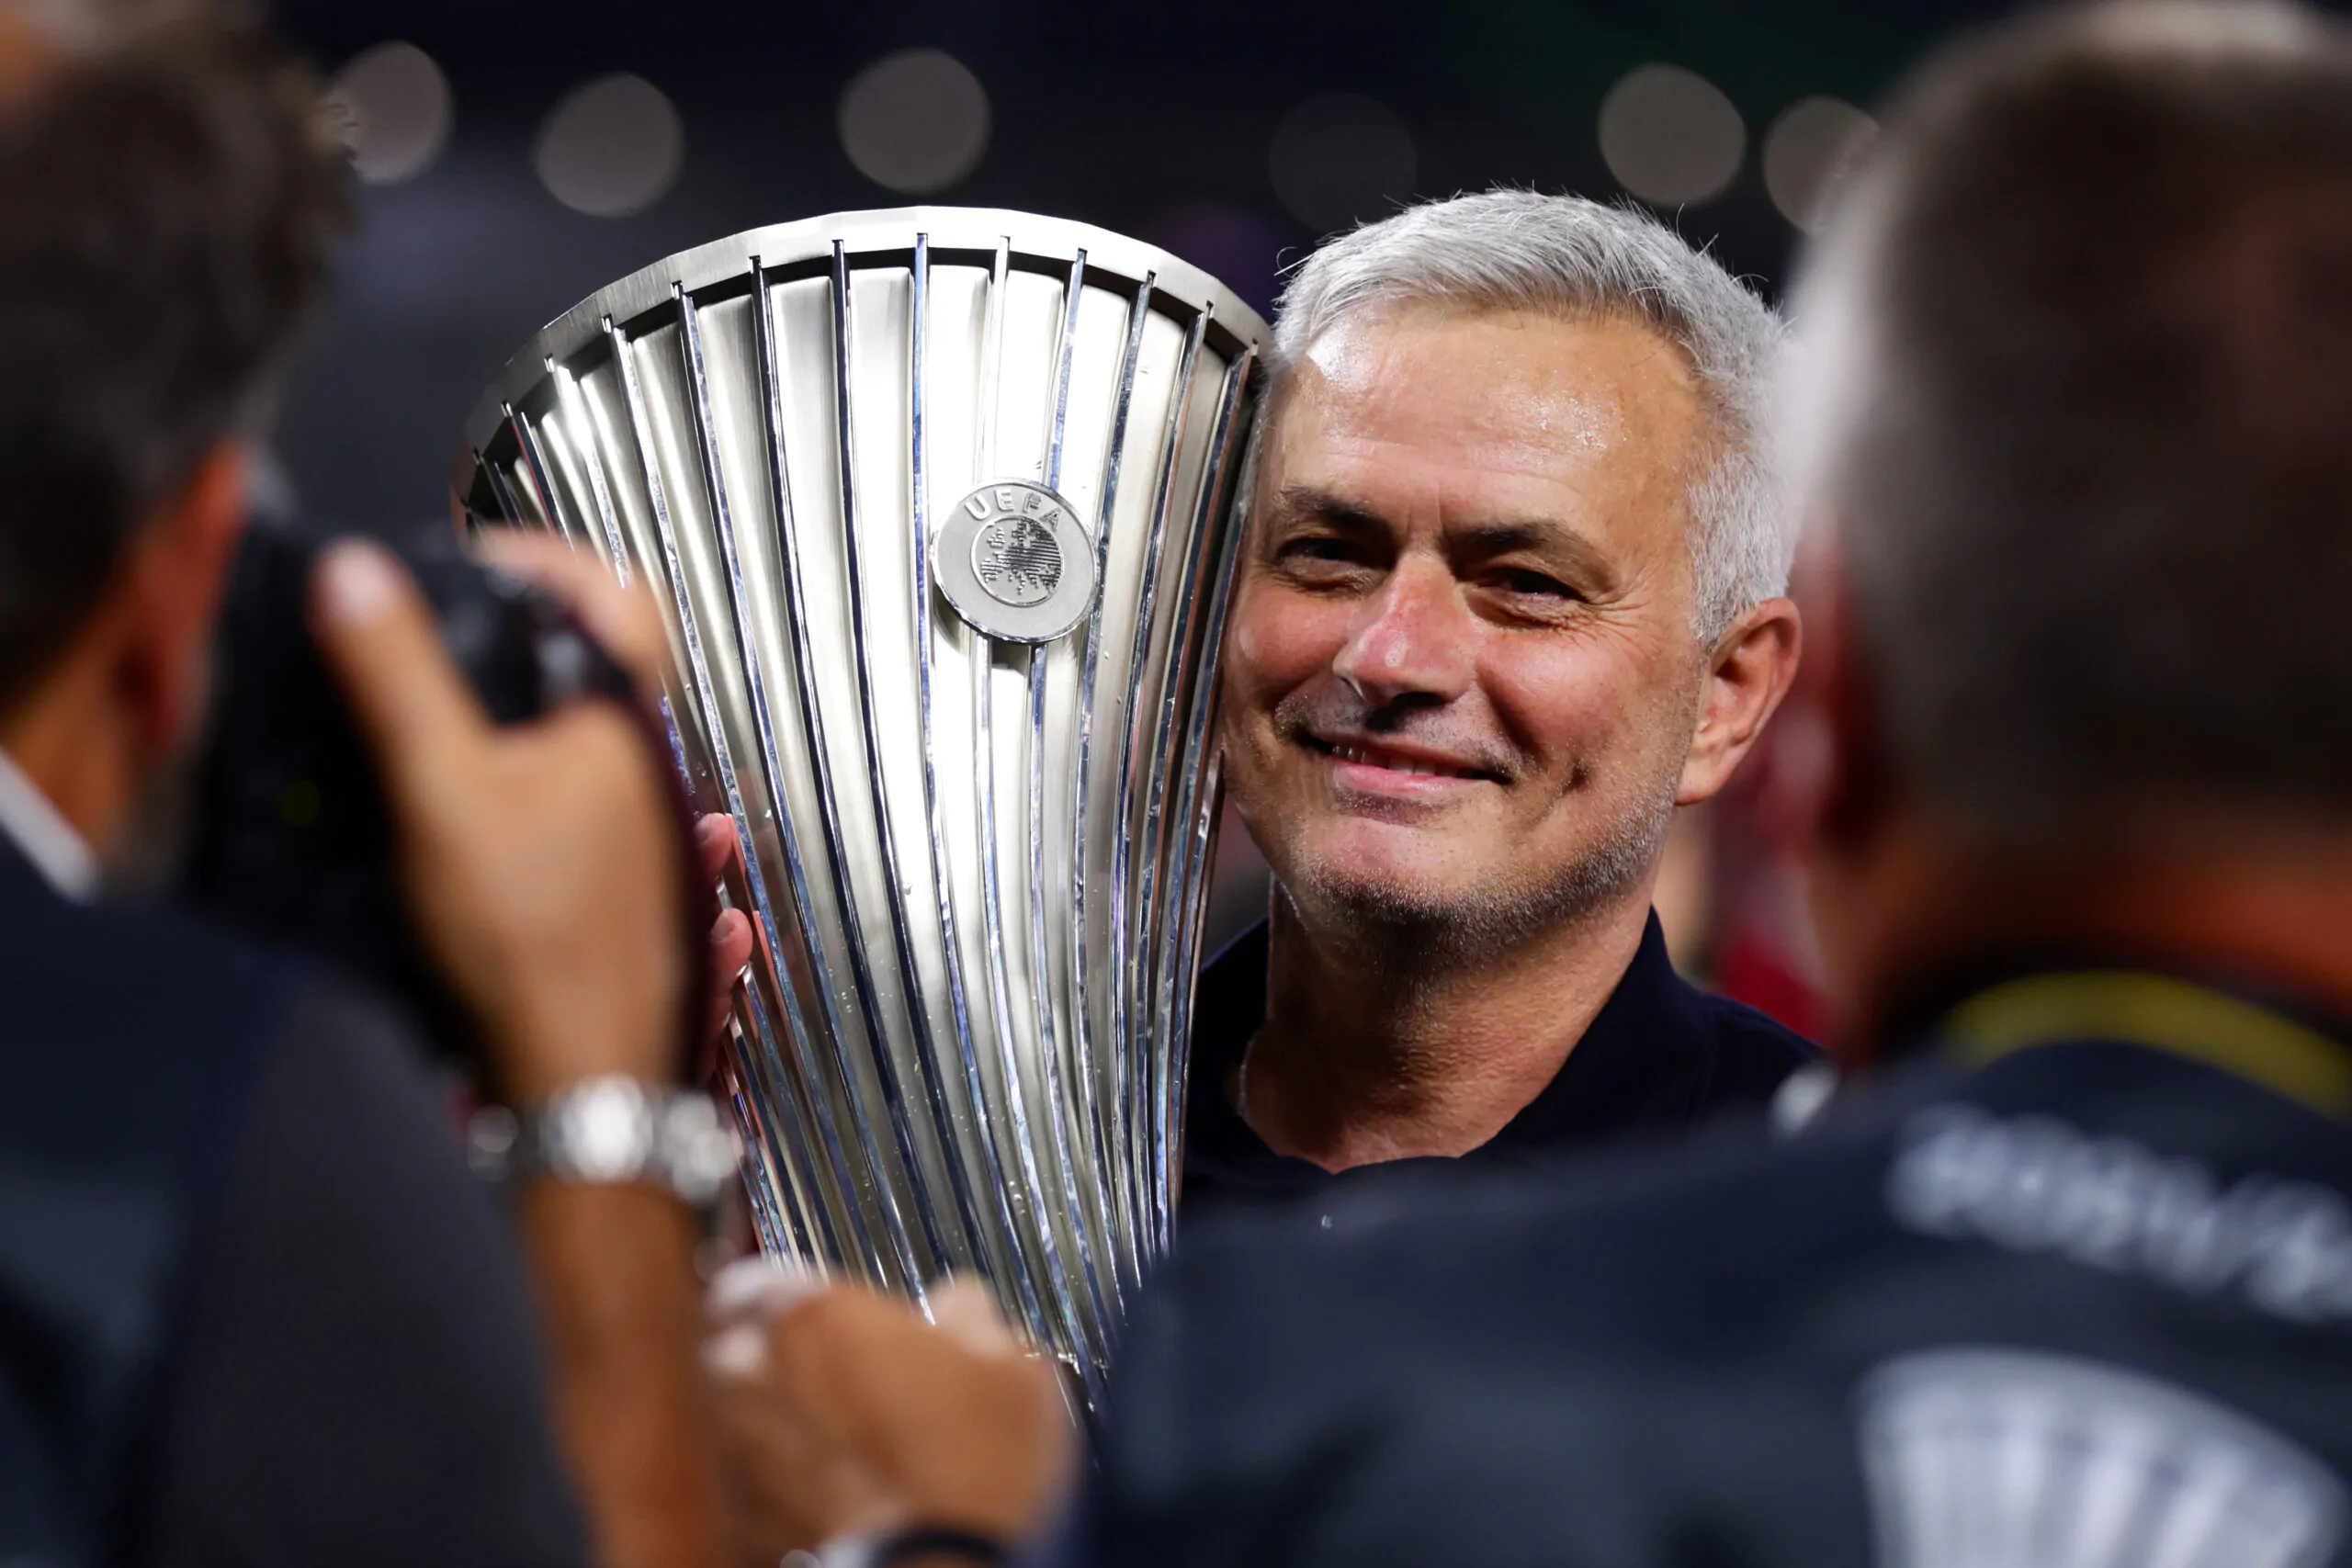 Mourinho celebrates his iconic achievement by inking a tattoo – the Champions League trophy sandwiched between Europa League and Conference League cups.